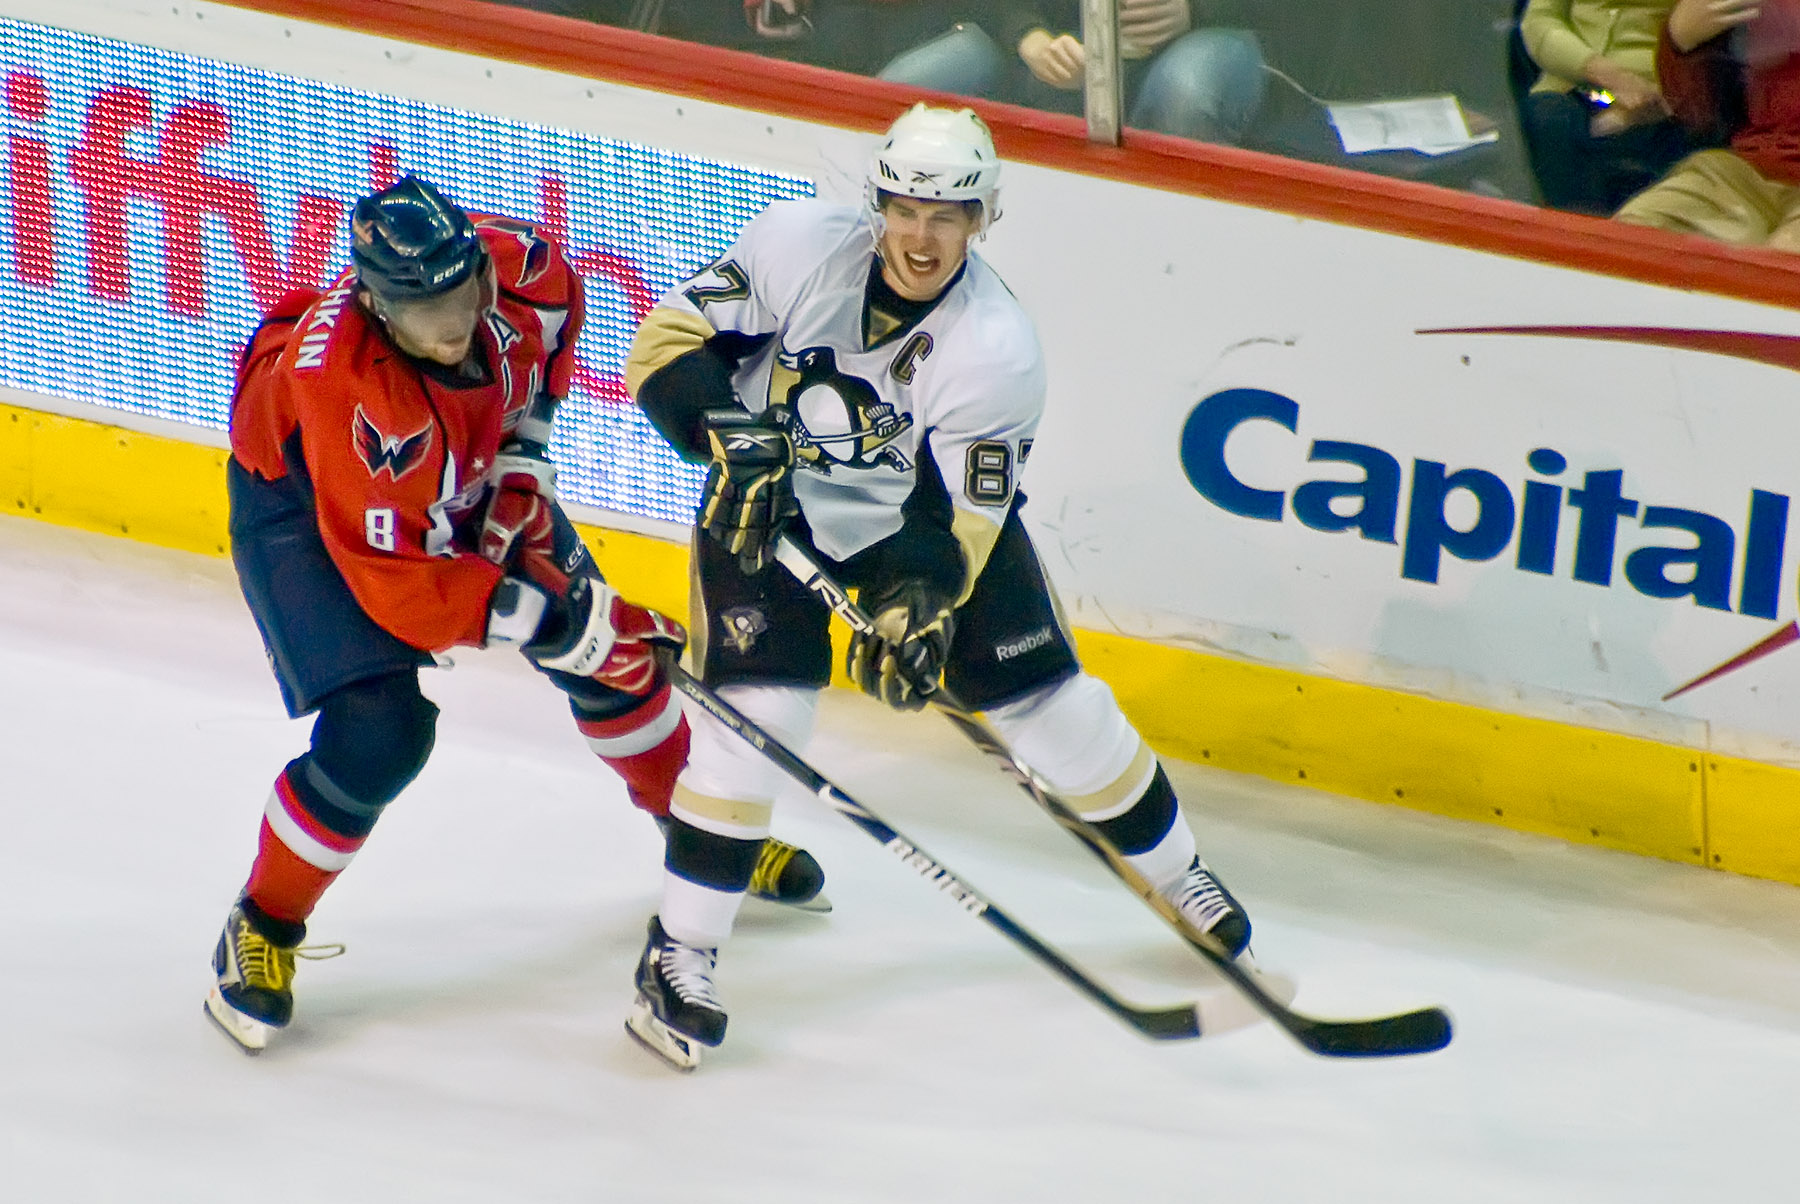 Alexander Ovechkin and Sidney Crosby remain huge rivals. (Flickr)